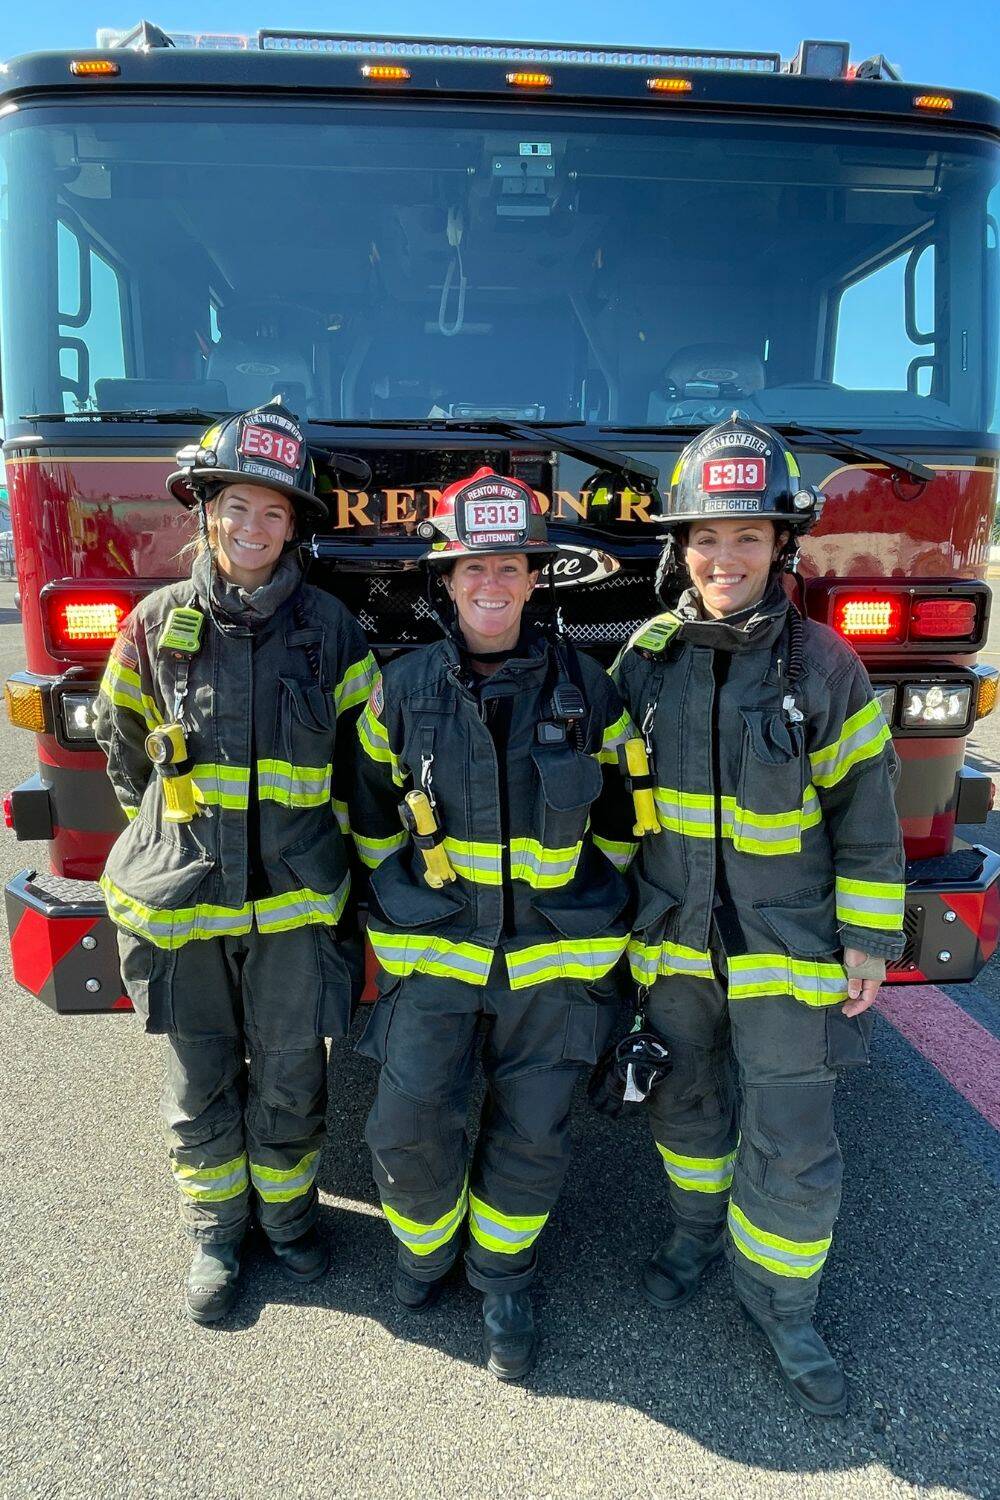 Engine 313 crew from left to right: Firefighter Michaela Wallace, Lt. Theresa Weaver, Firefighter Jessica Clearman. (Photo courtesy of Renton Regional Fire Authority)